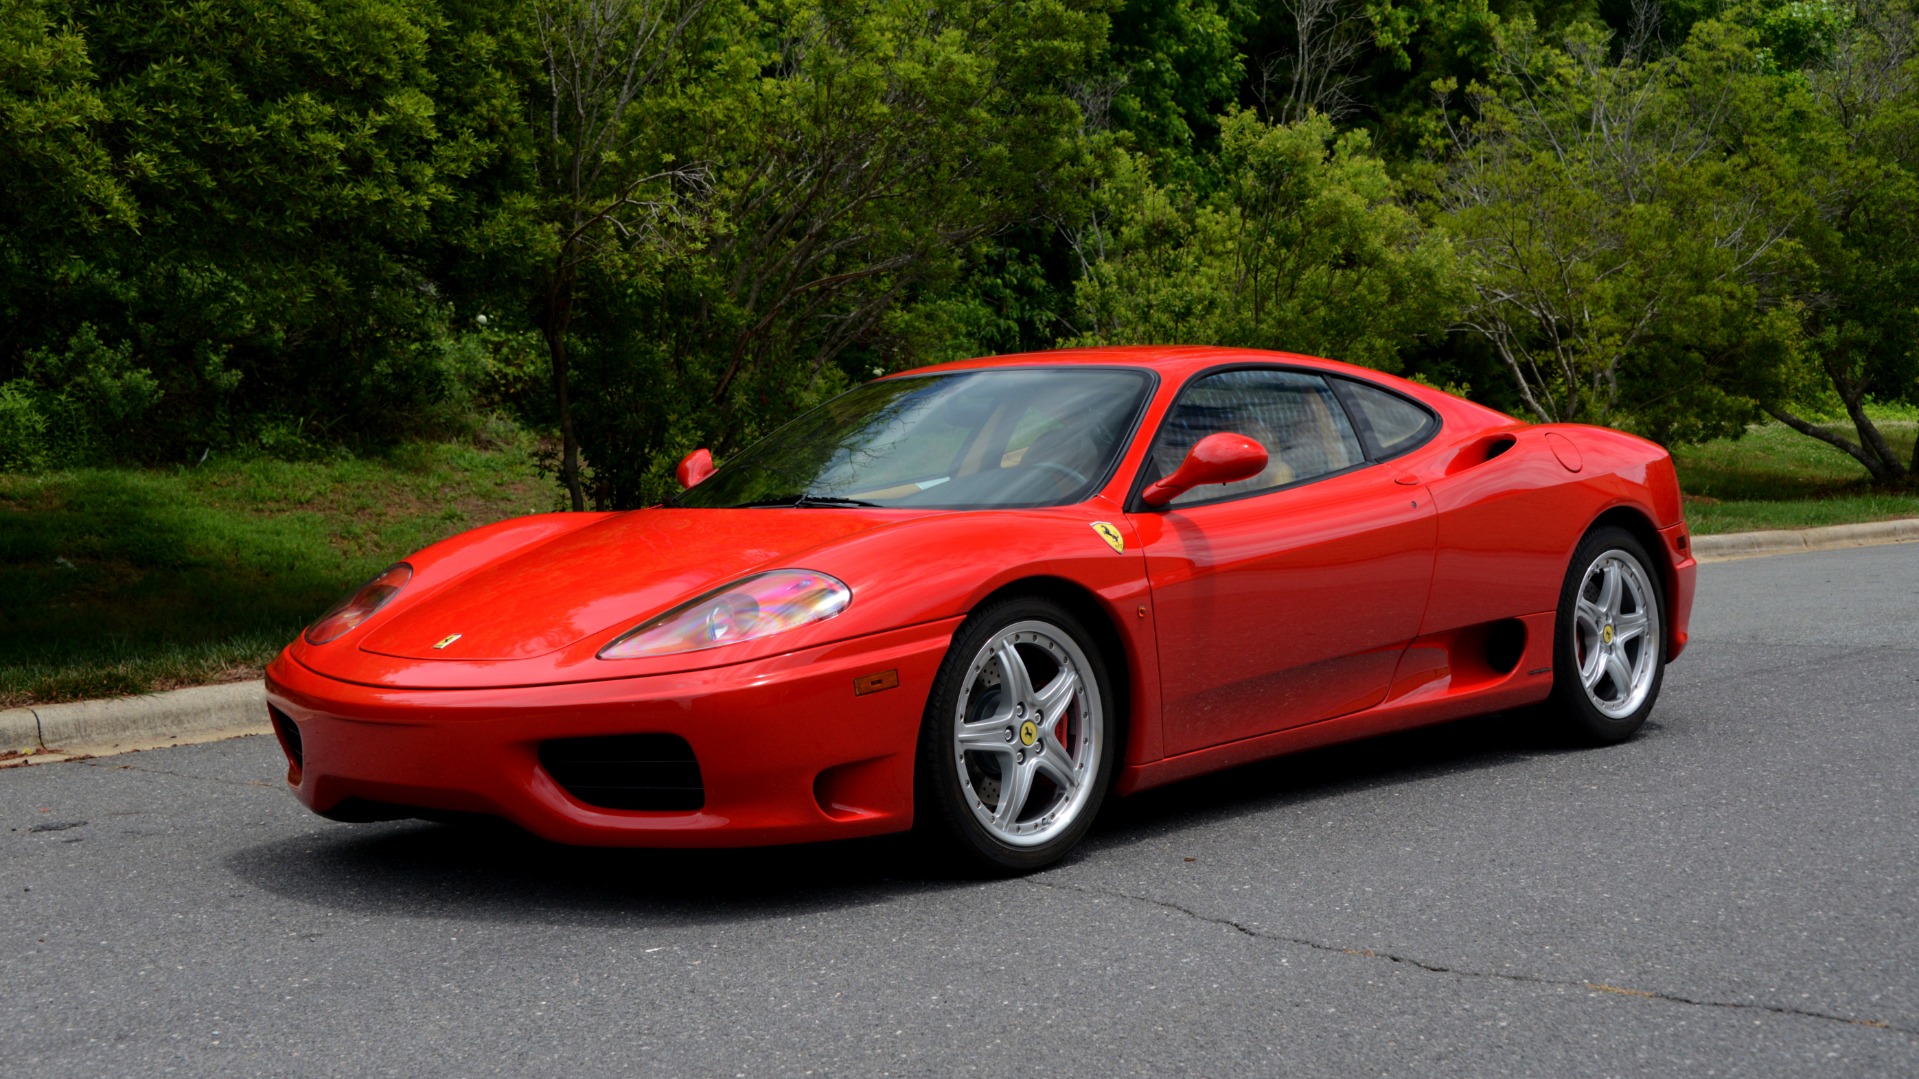 Used 2004 Ferrari 360 MODENA COUPE / GATED 6-SPD MANUAL / SUNROOF / LOW MILES for sale Sold at Formula Imports in Charlotte NC 28227 1